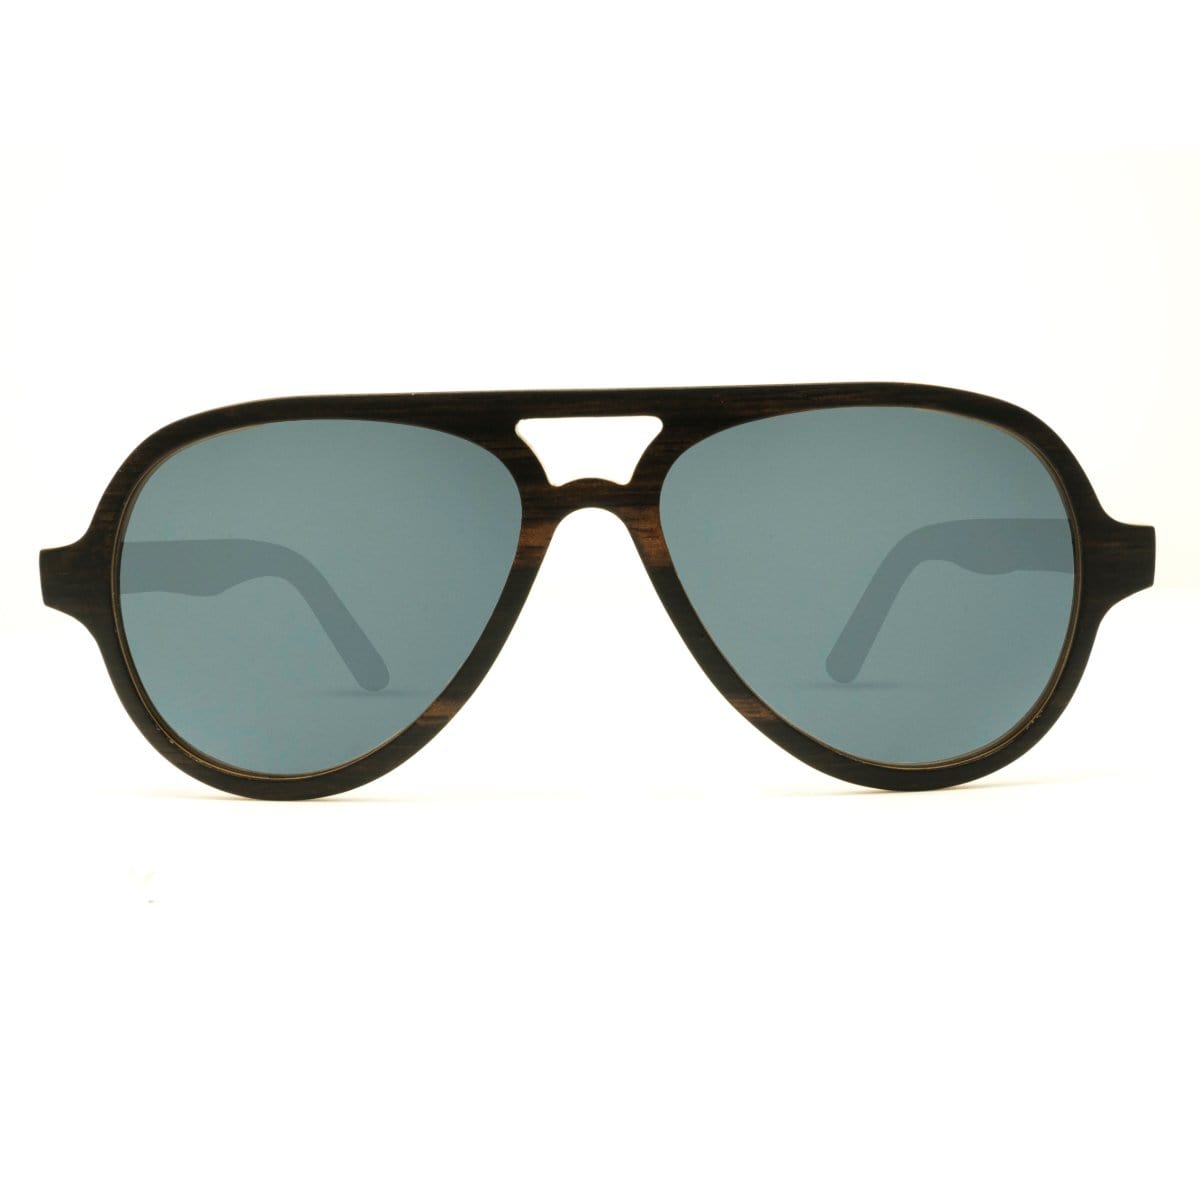 Wooden OG Sunglasses With Silver Mirror Lenses From SLYK - Front Angle